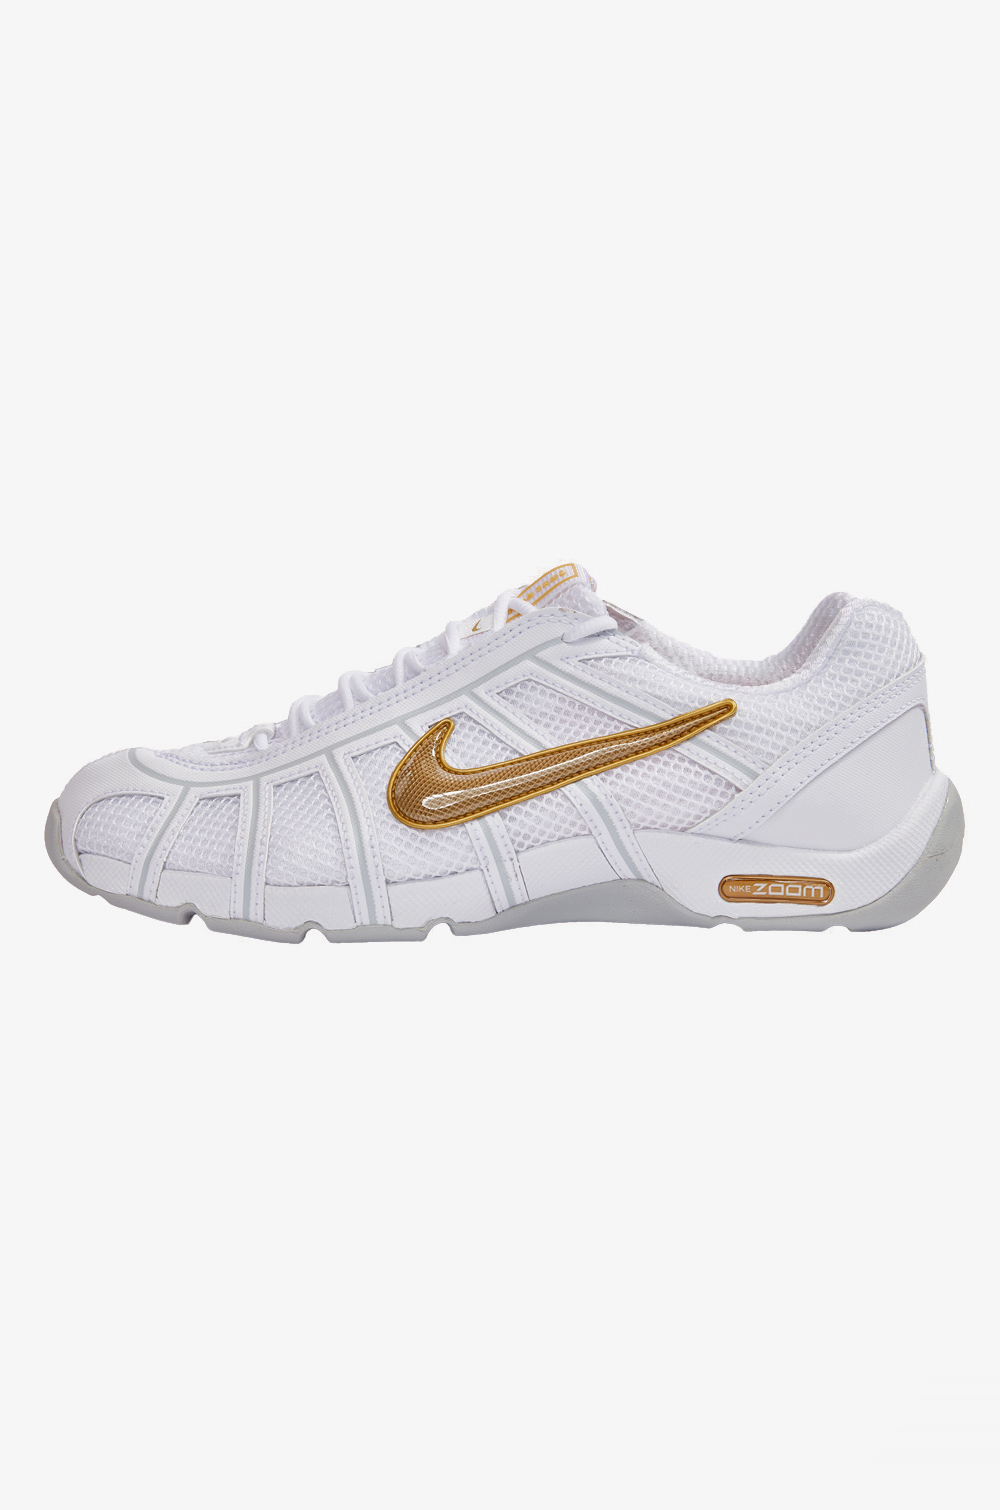 Nike Air Zoom Fencer Gold